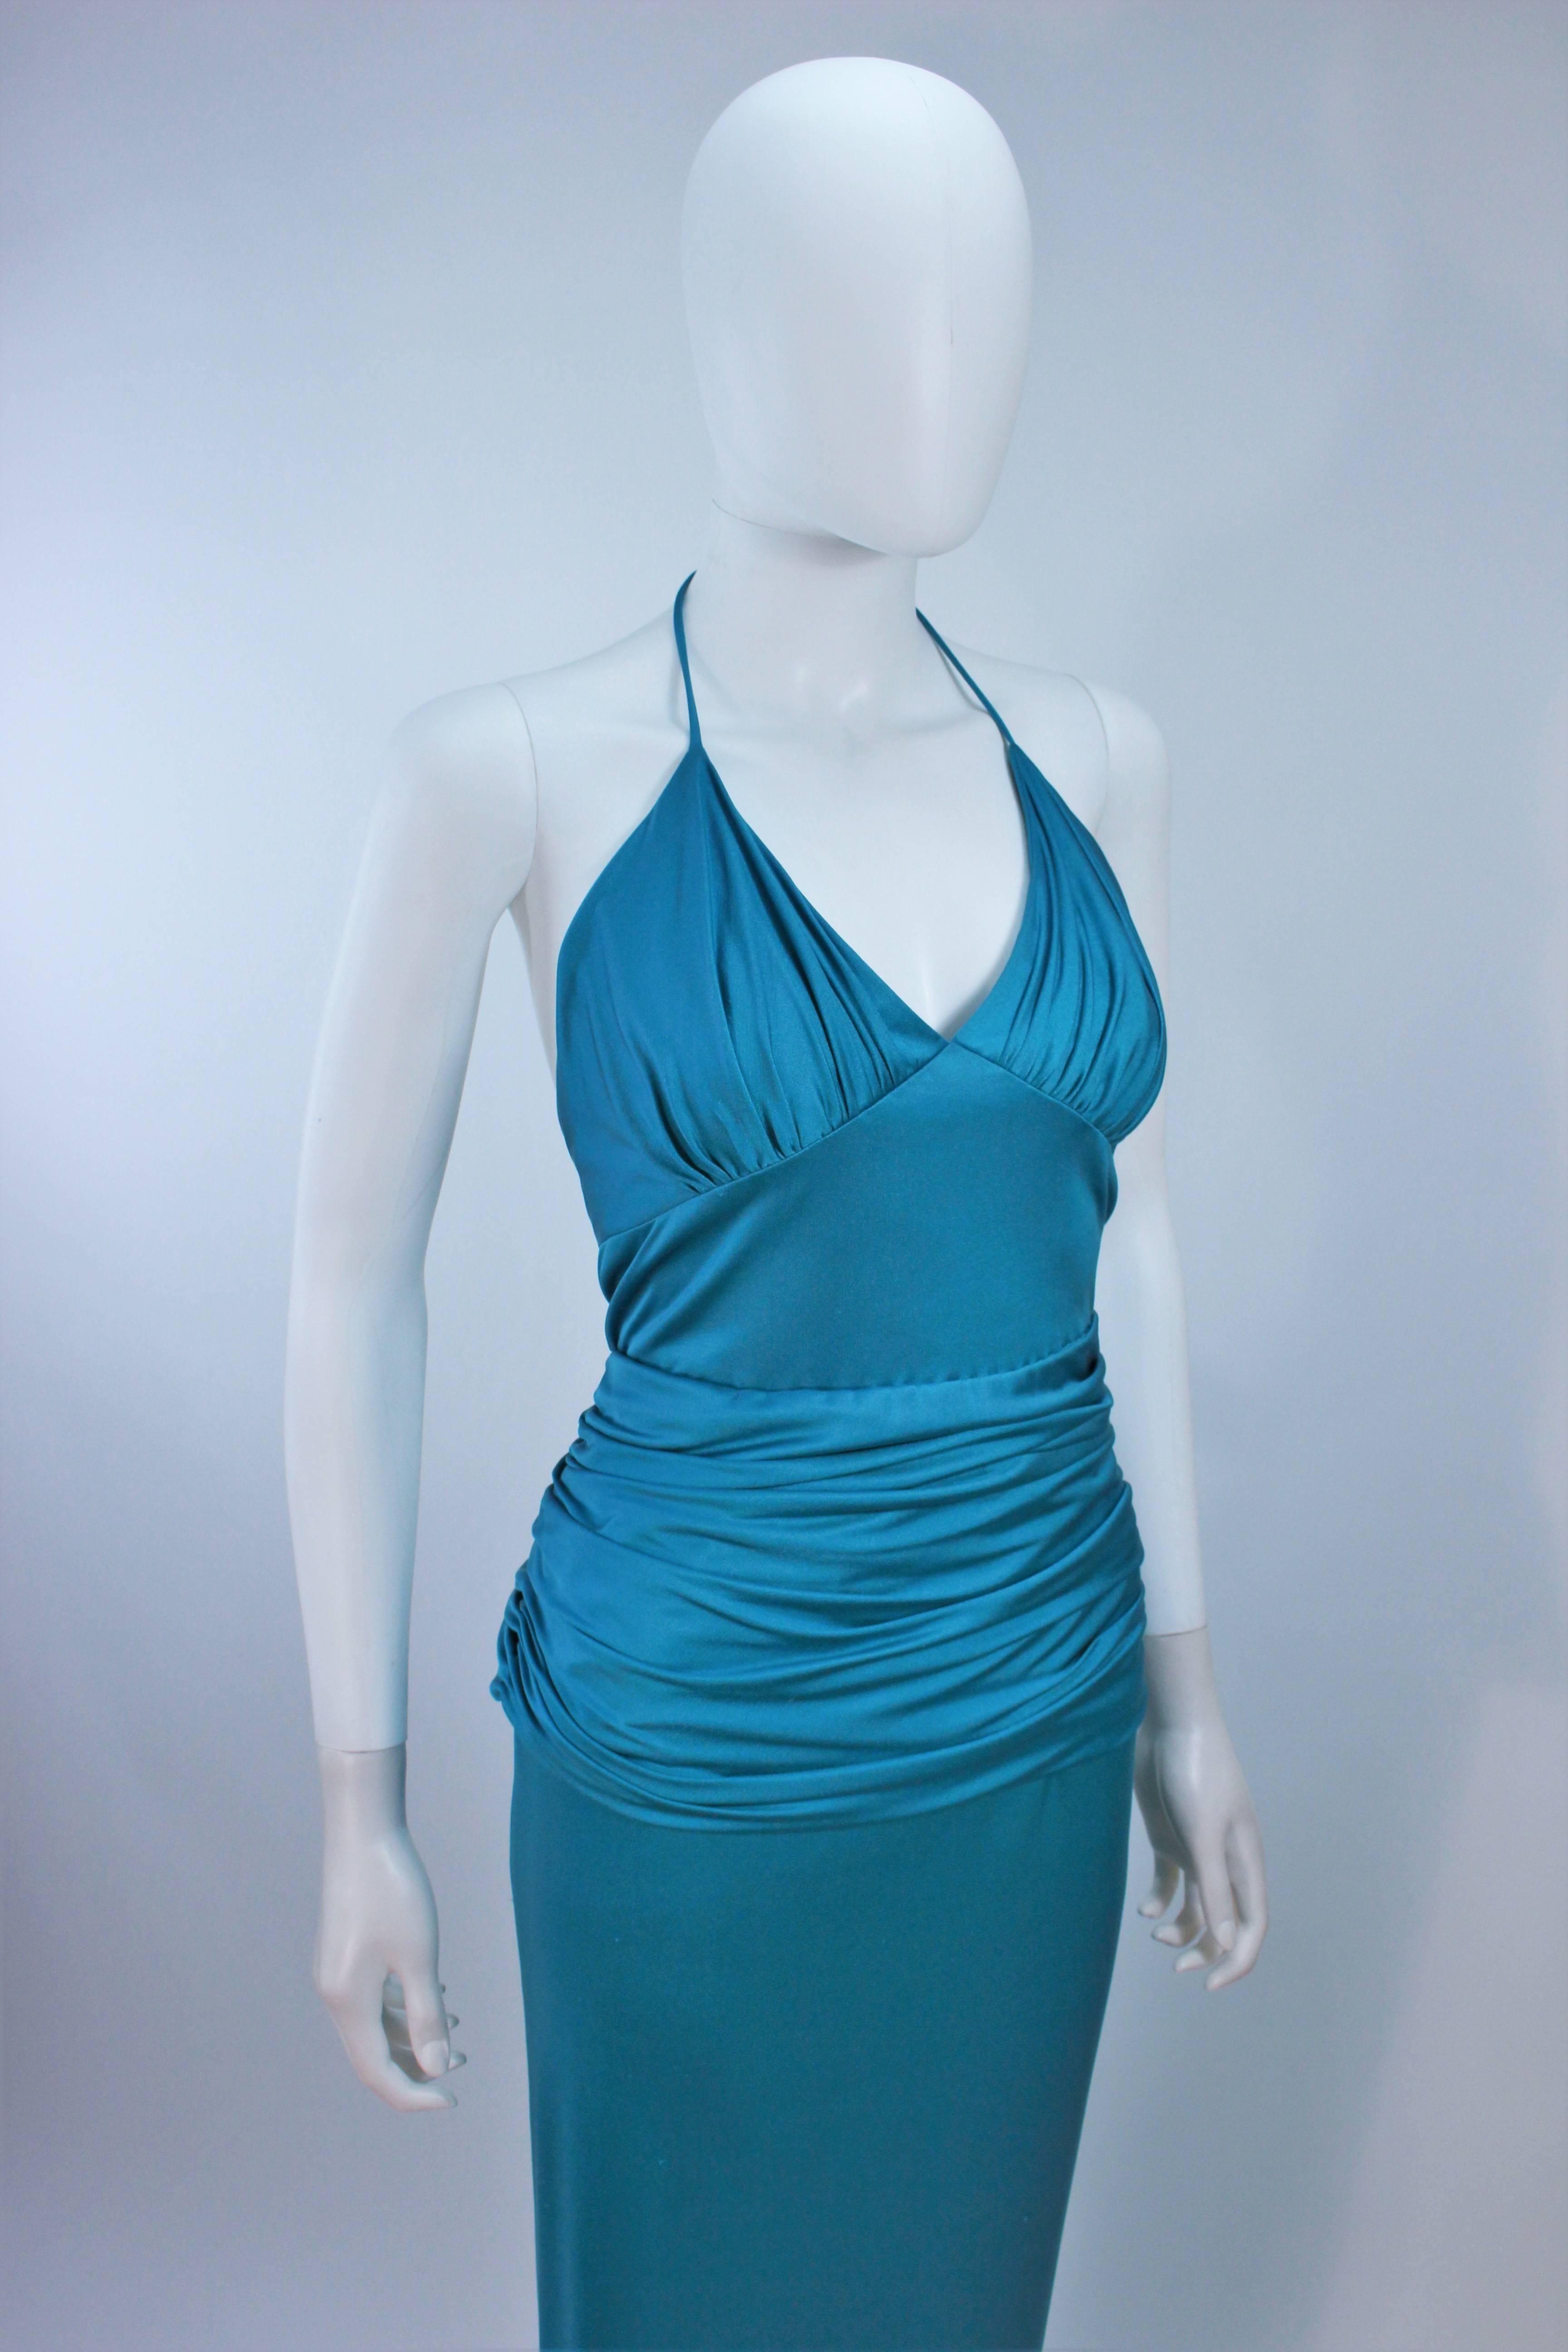 ELIZABETH MASON COUTURE Turquoise Silk Jersey Halter Gown Made to Order For Sale 1